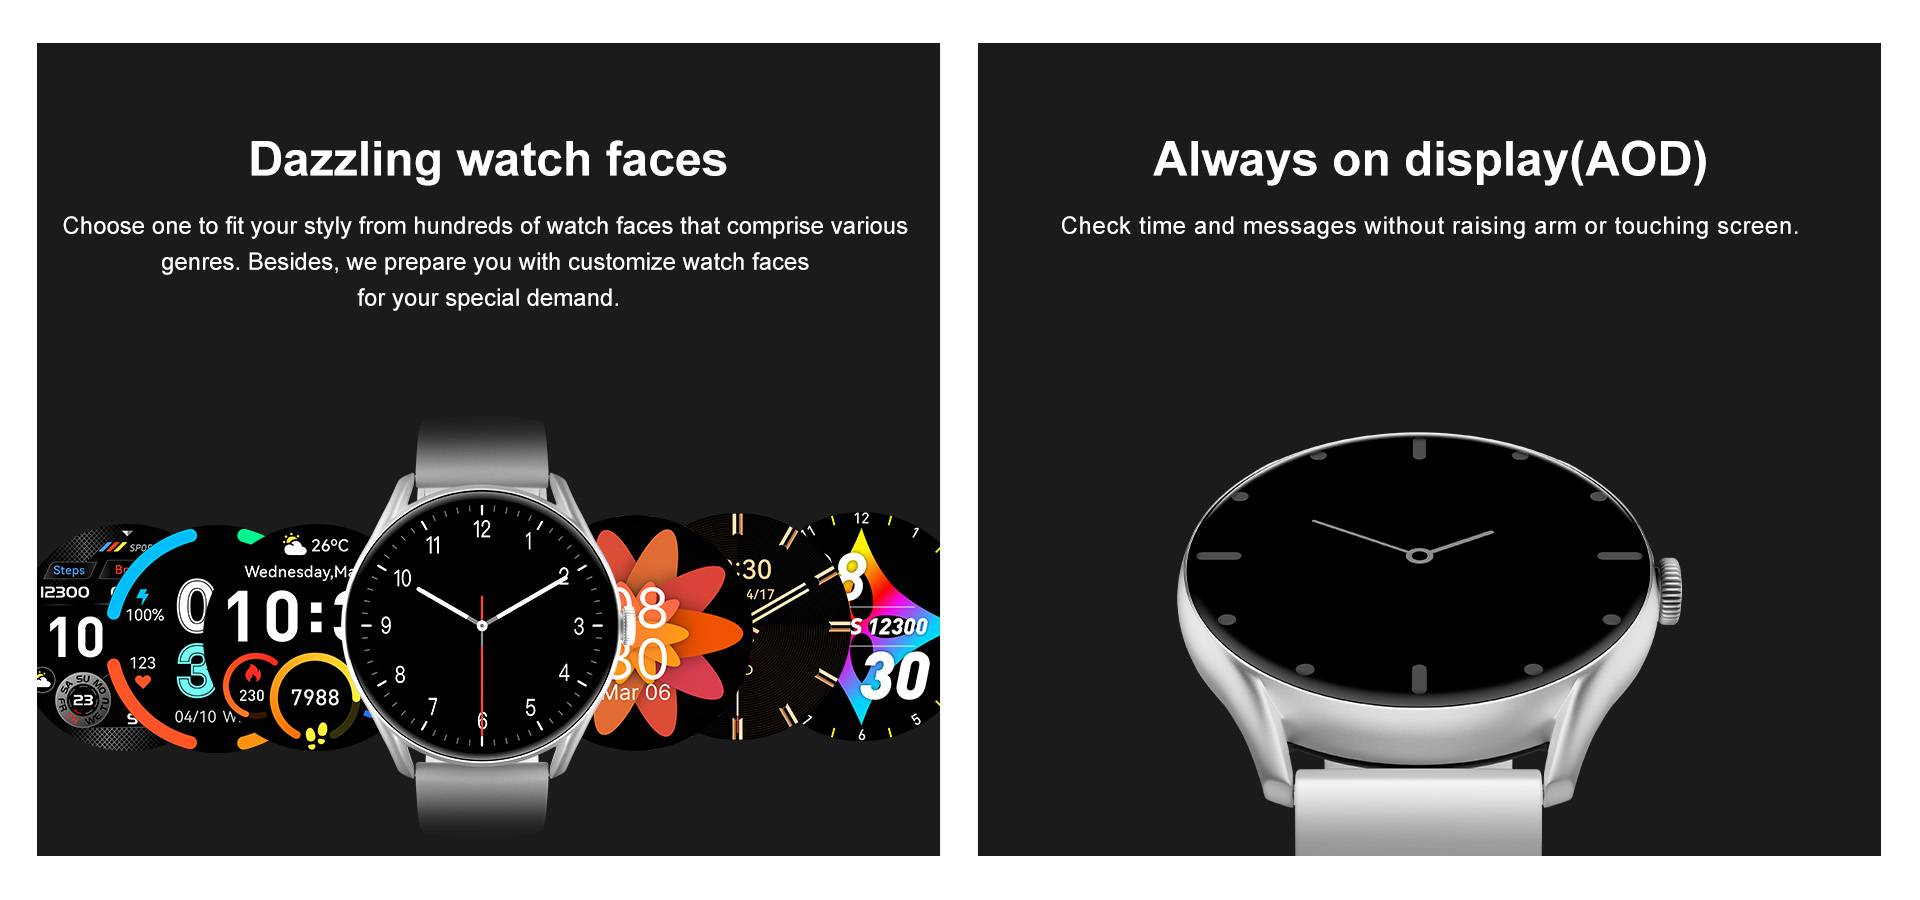 Dazzling watch faces